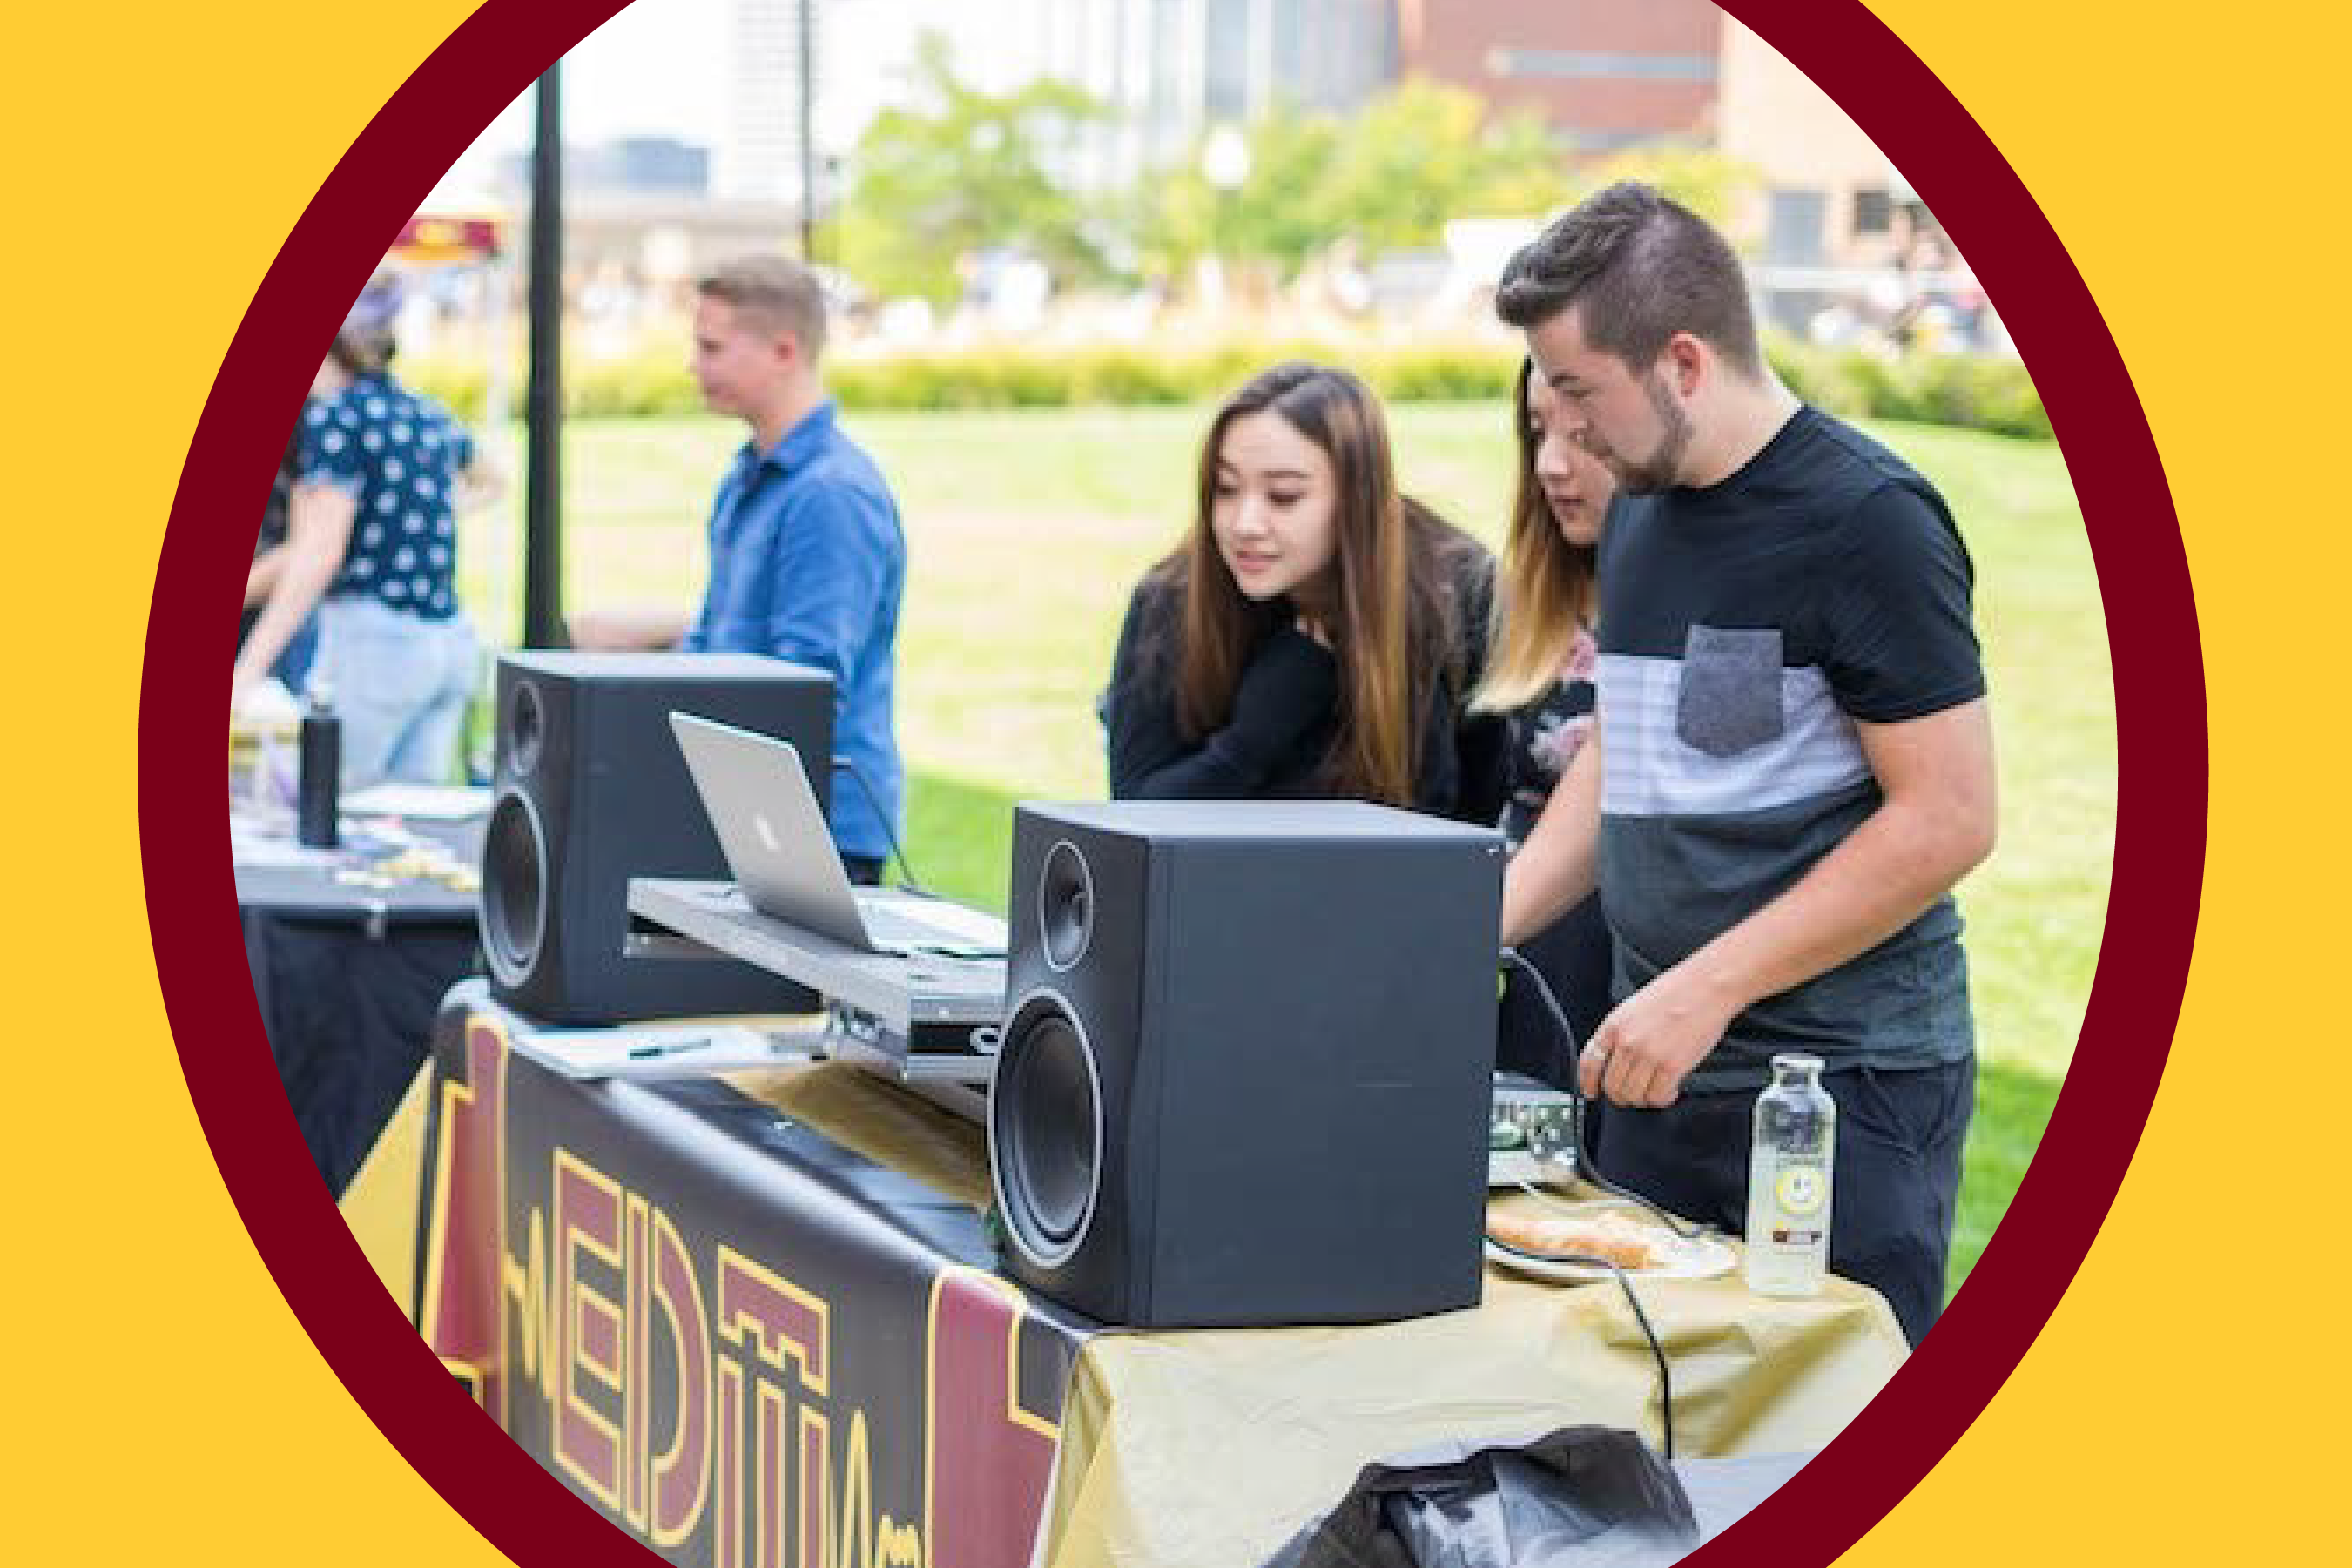 Students set up at gopherlink student group fair